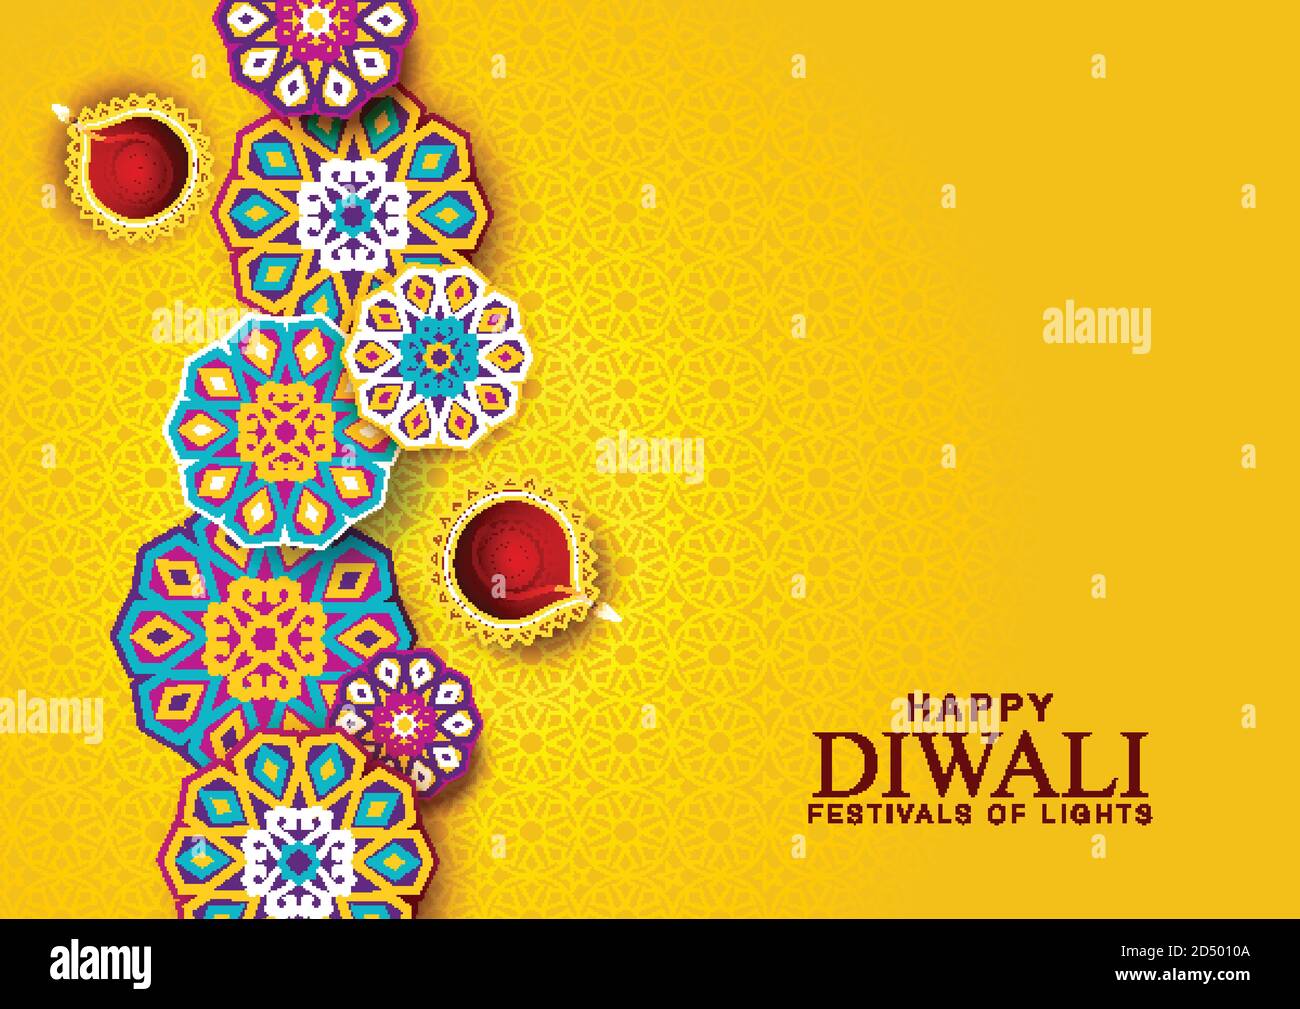 Happy Diwali celebration background. Top view of banner design decorated with illuminated oil lamps on patterned yellow background. vector illustratio Stock Vector